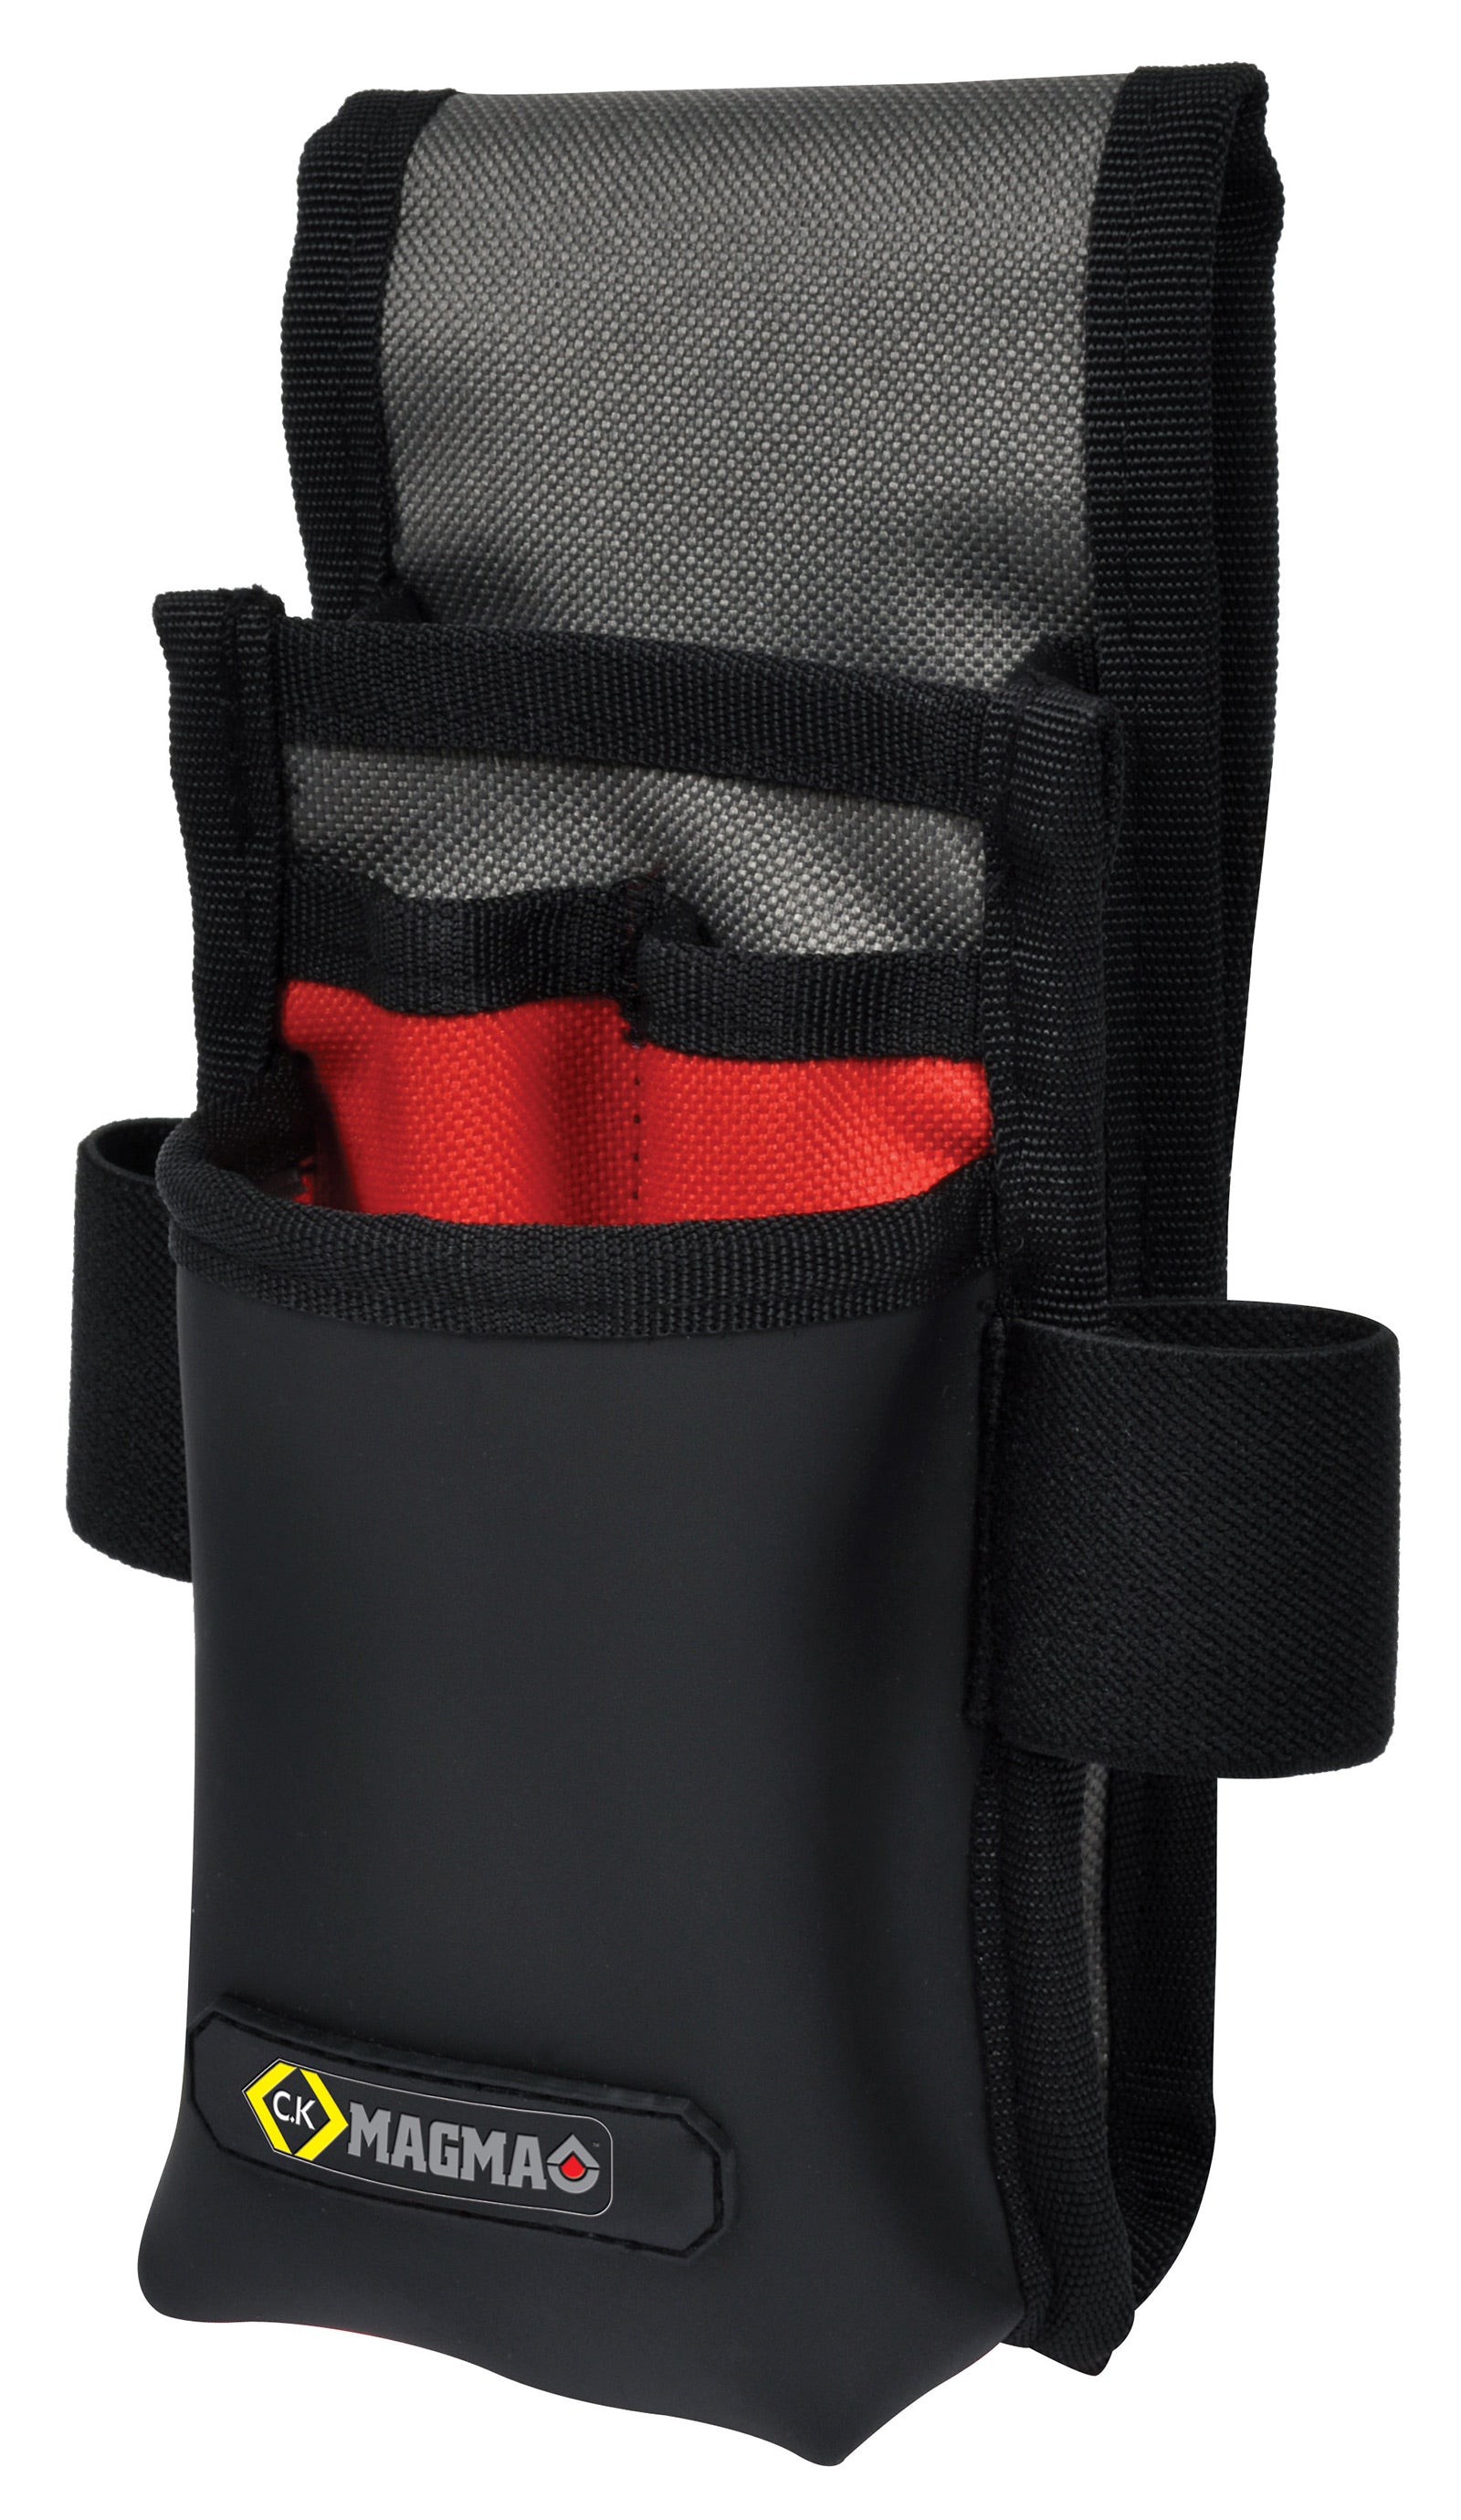 C.K Magma MA2724 tool pouch